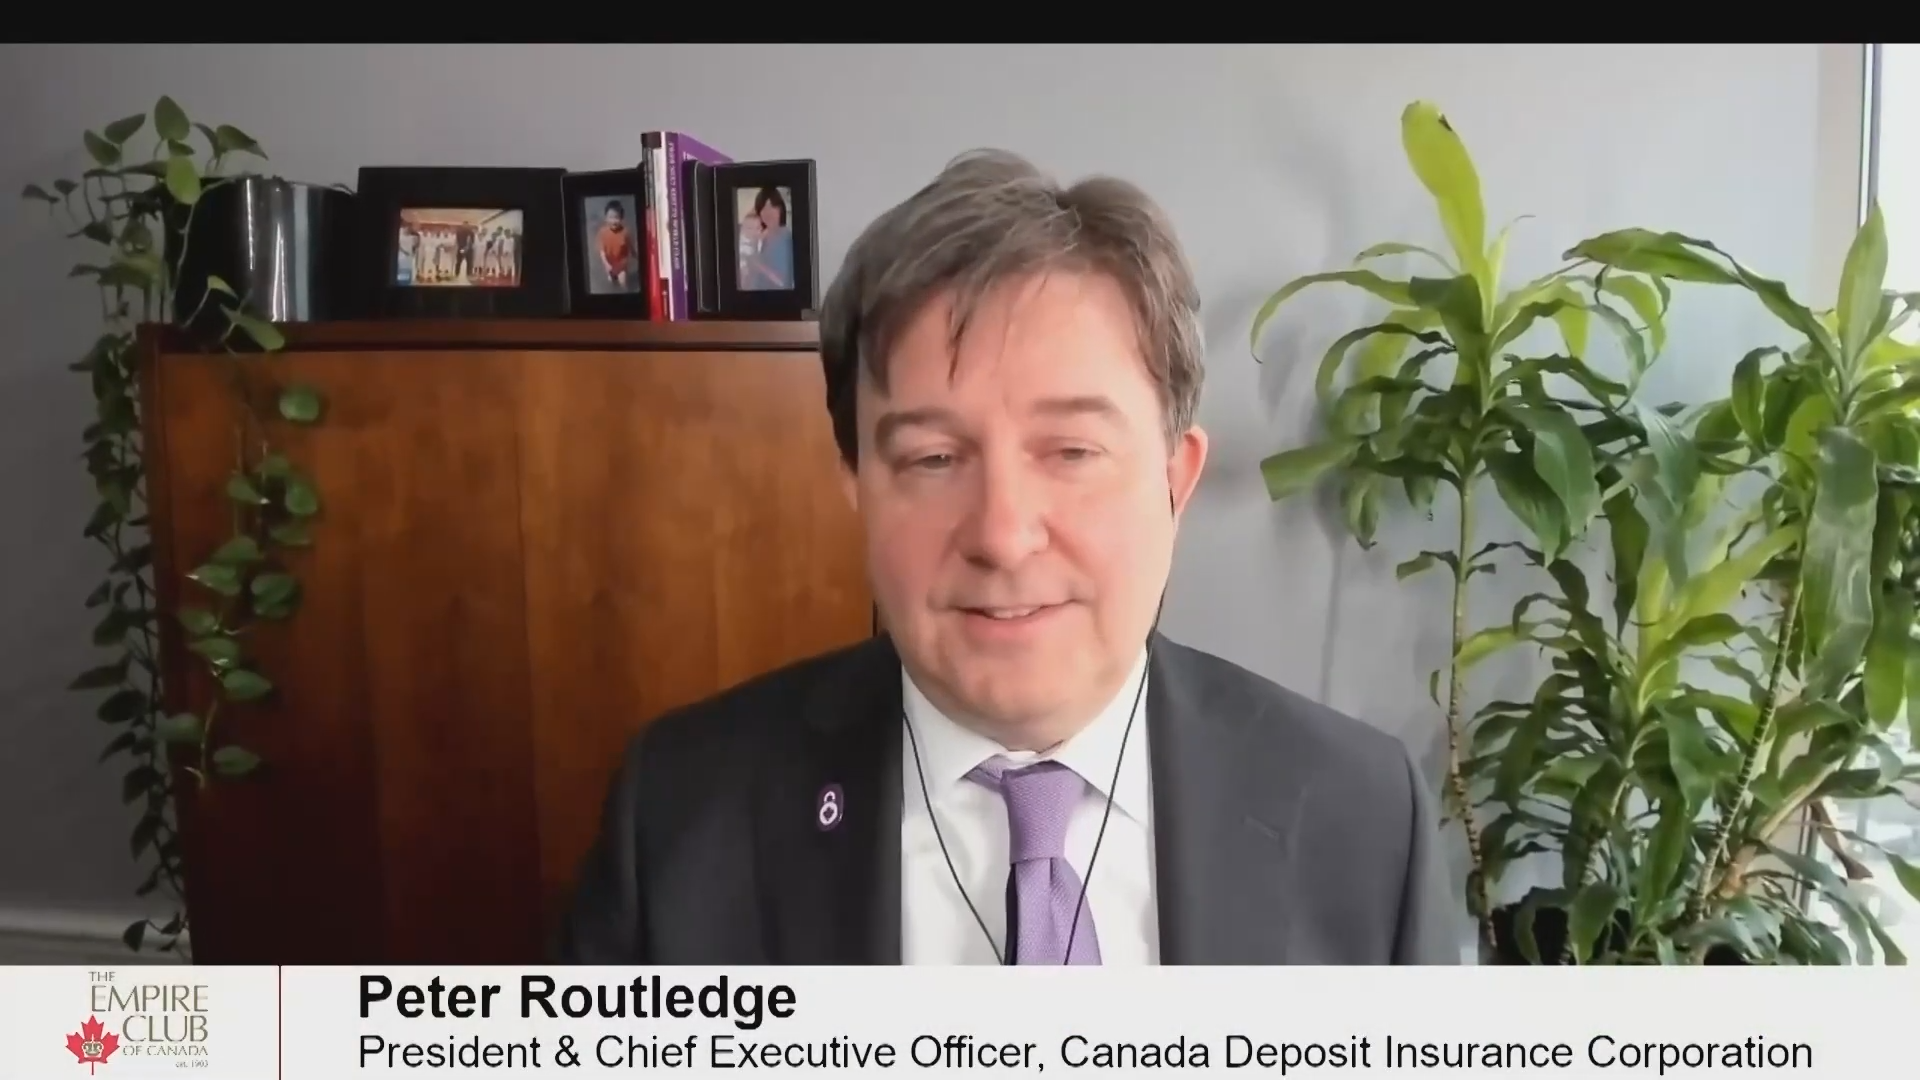 Peter Routledge, President and CEO, Canada Deposit Insurance Corporation speaking in a virtual event